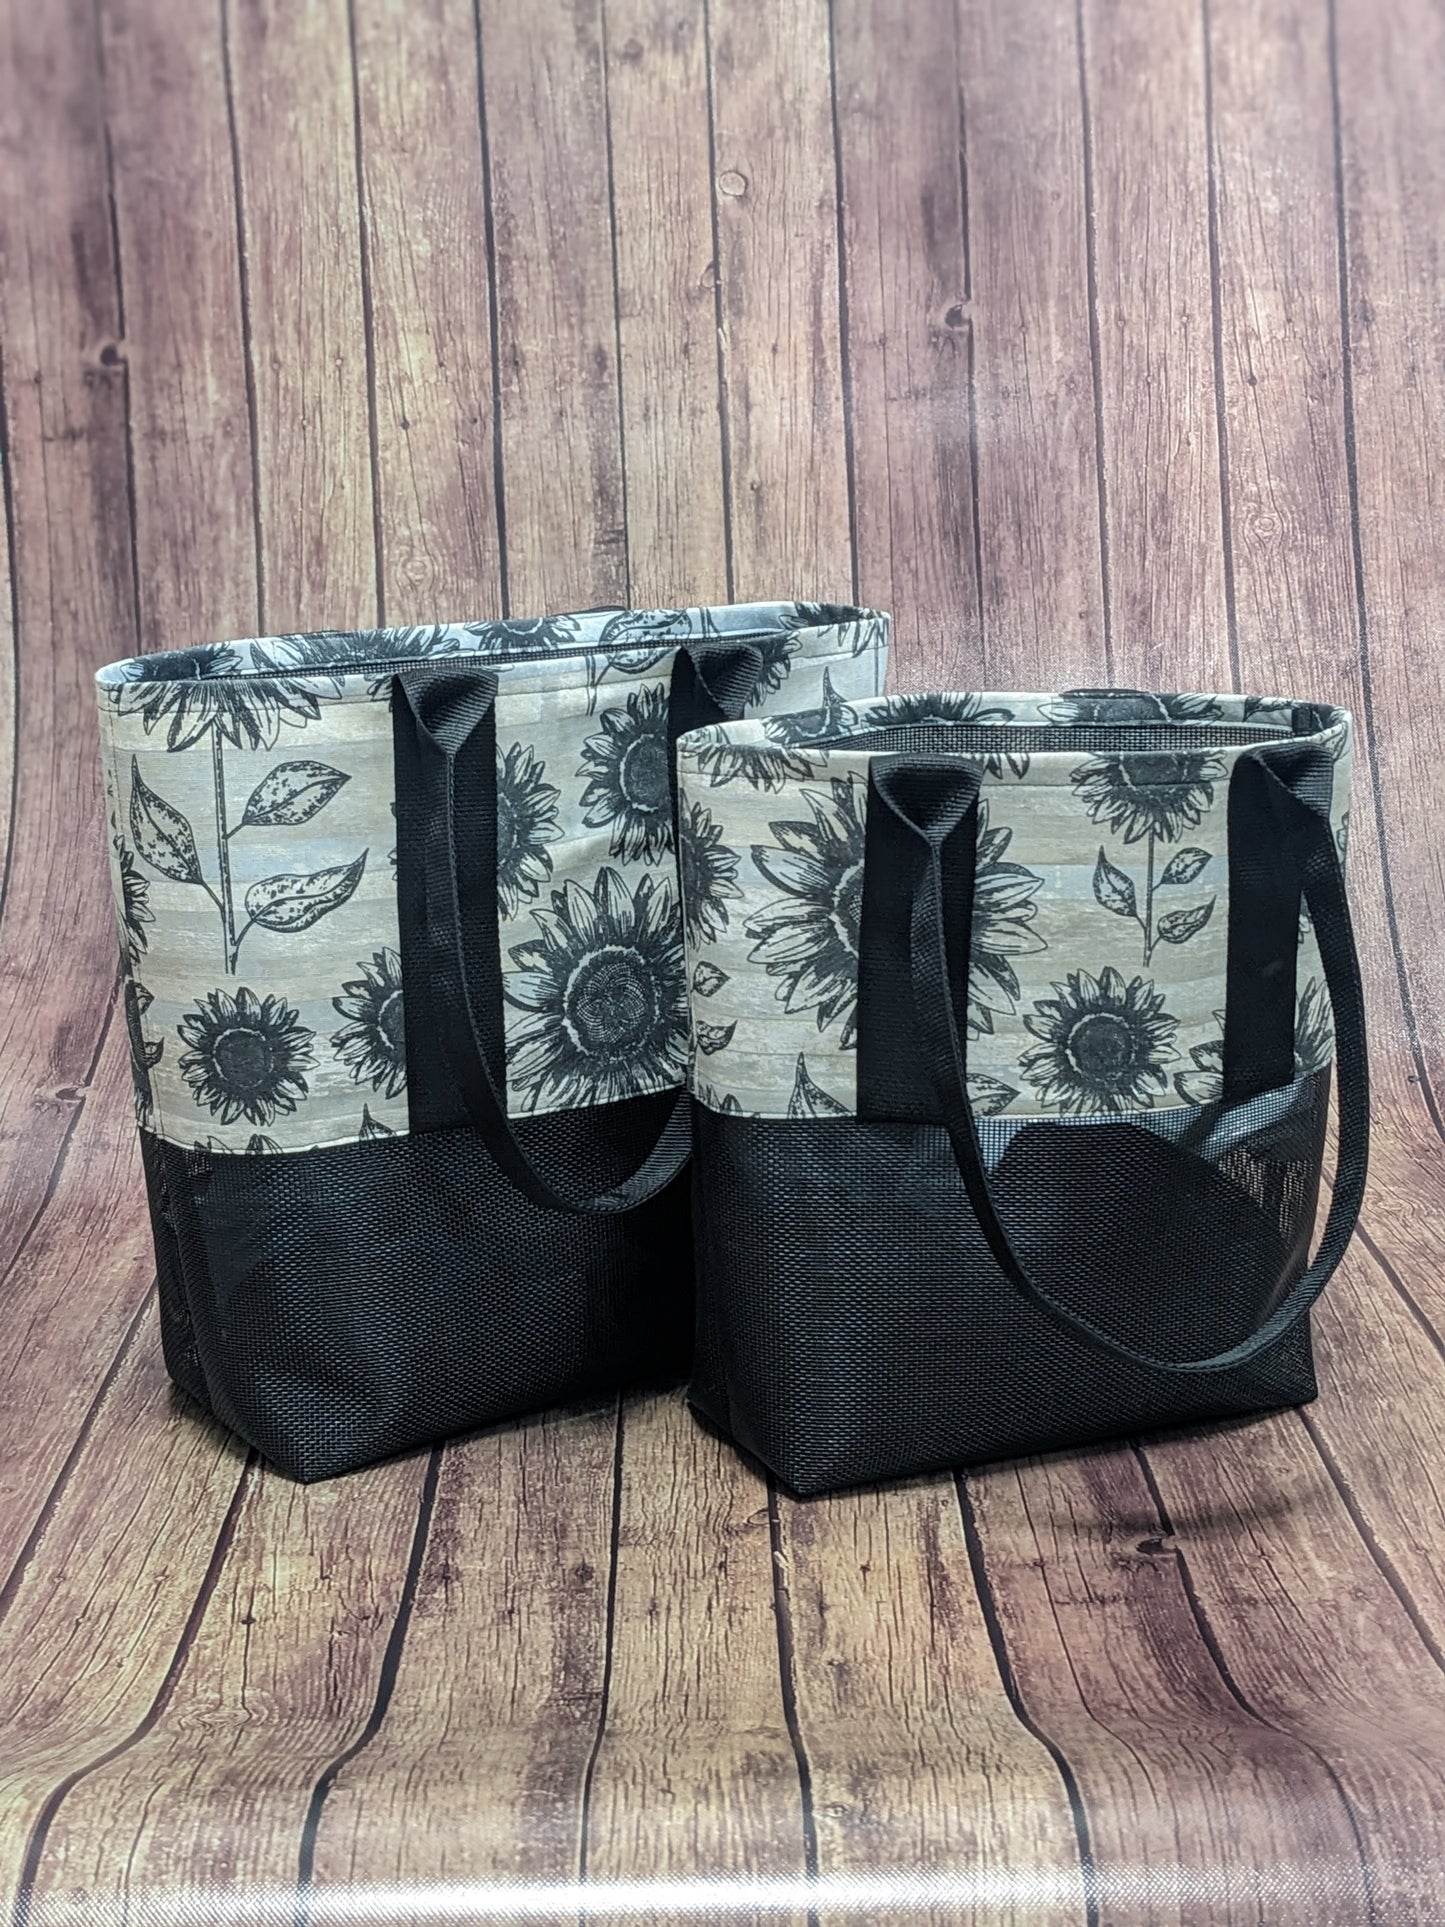 Jo Jo Ultimate Carry-All Tote Set [Sunflowers]: Versatile Practicality for Every Occasion